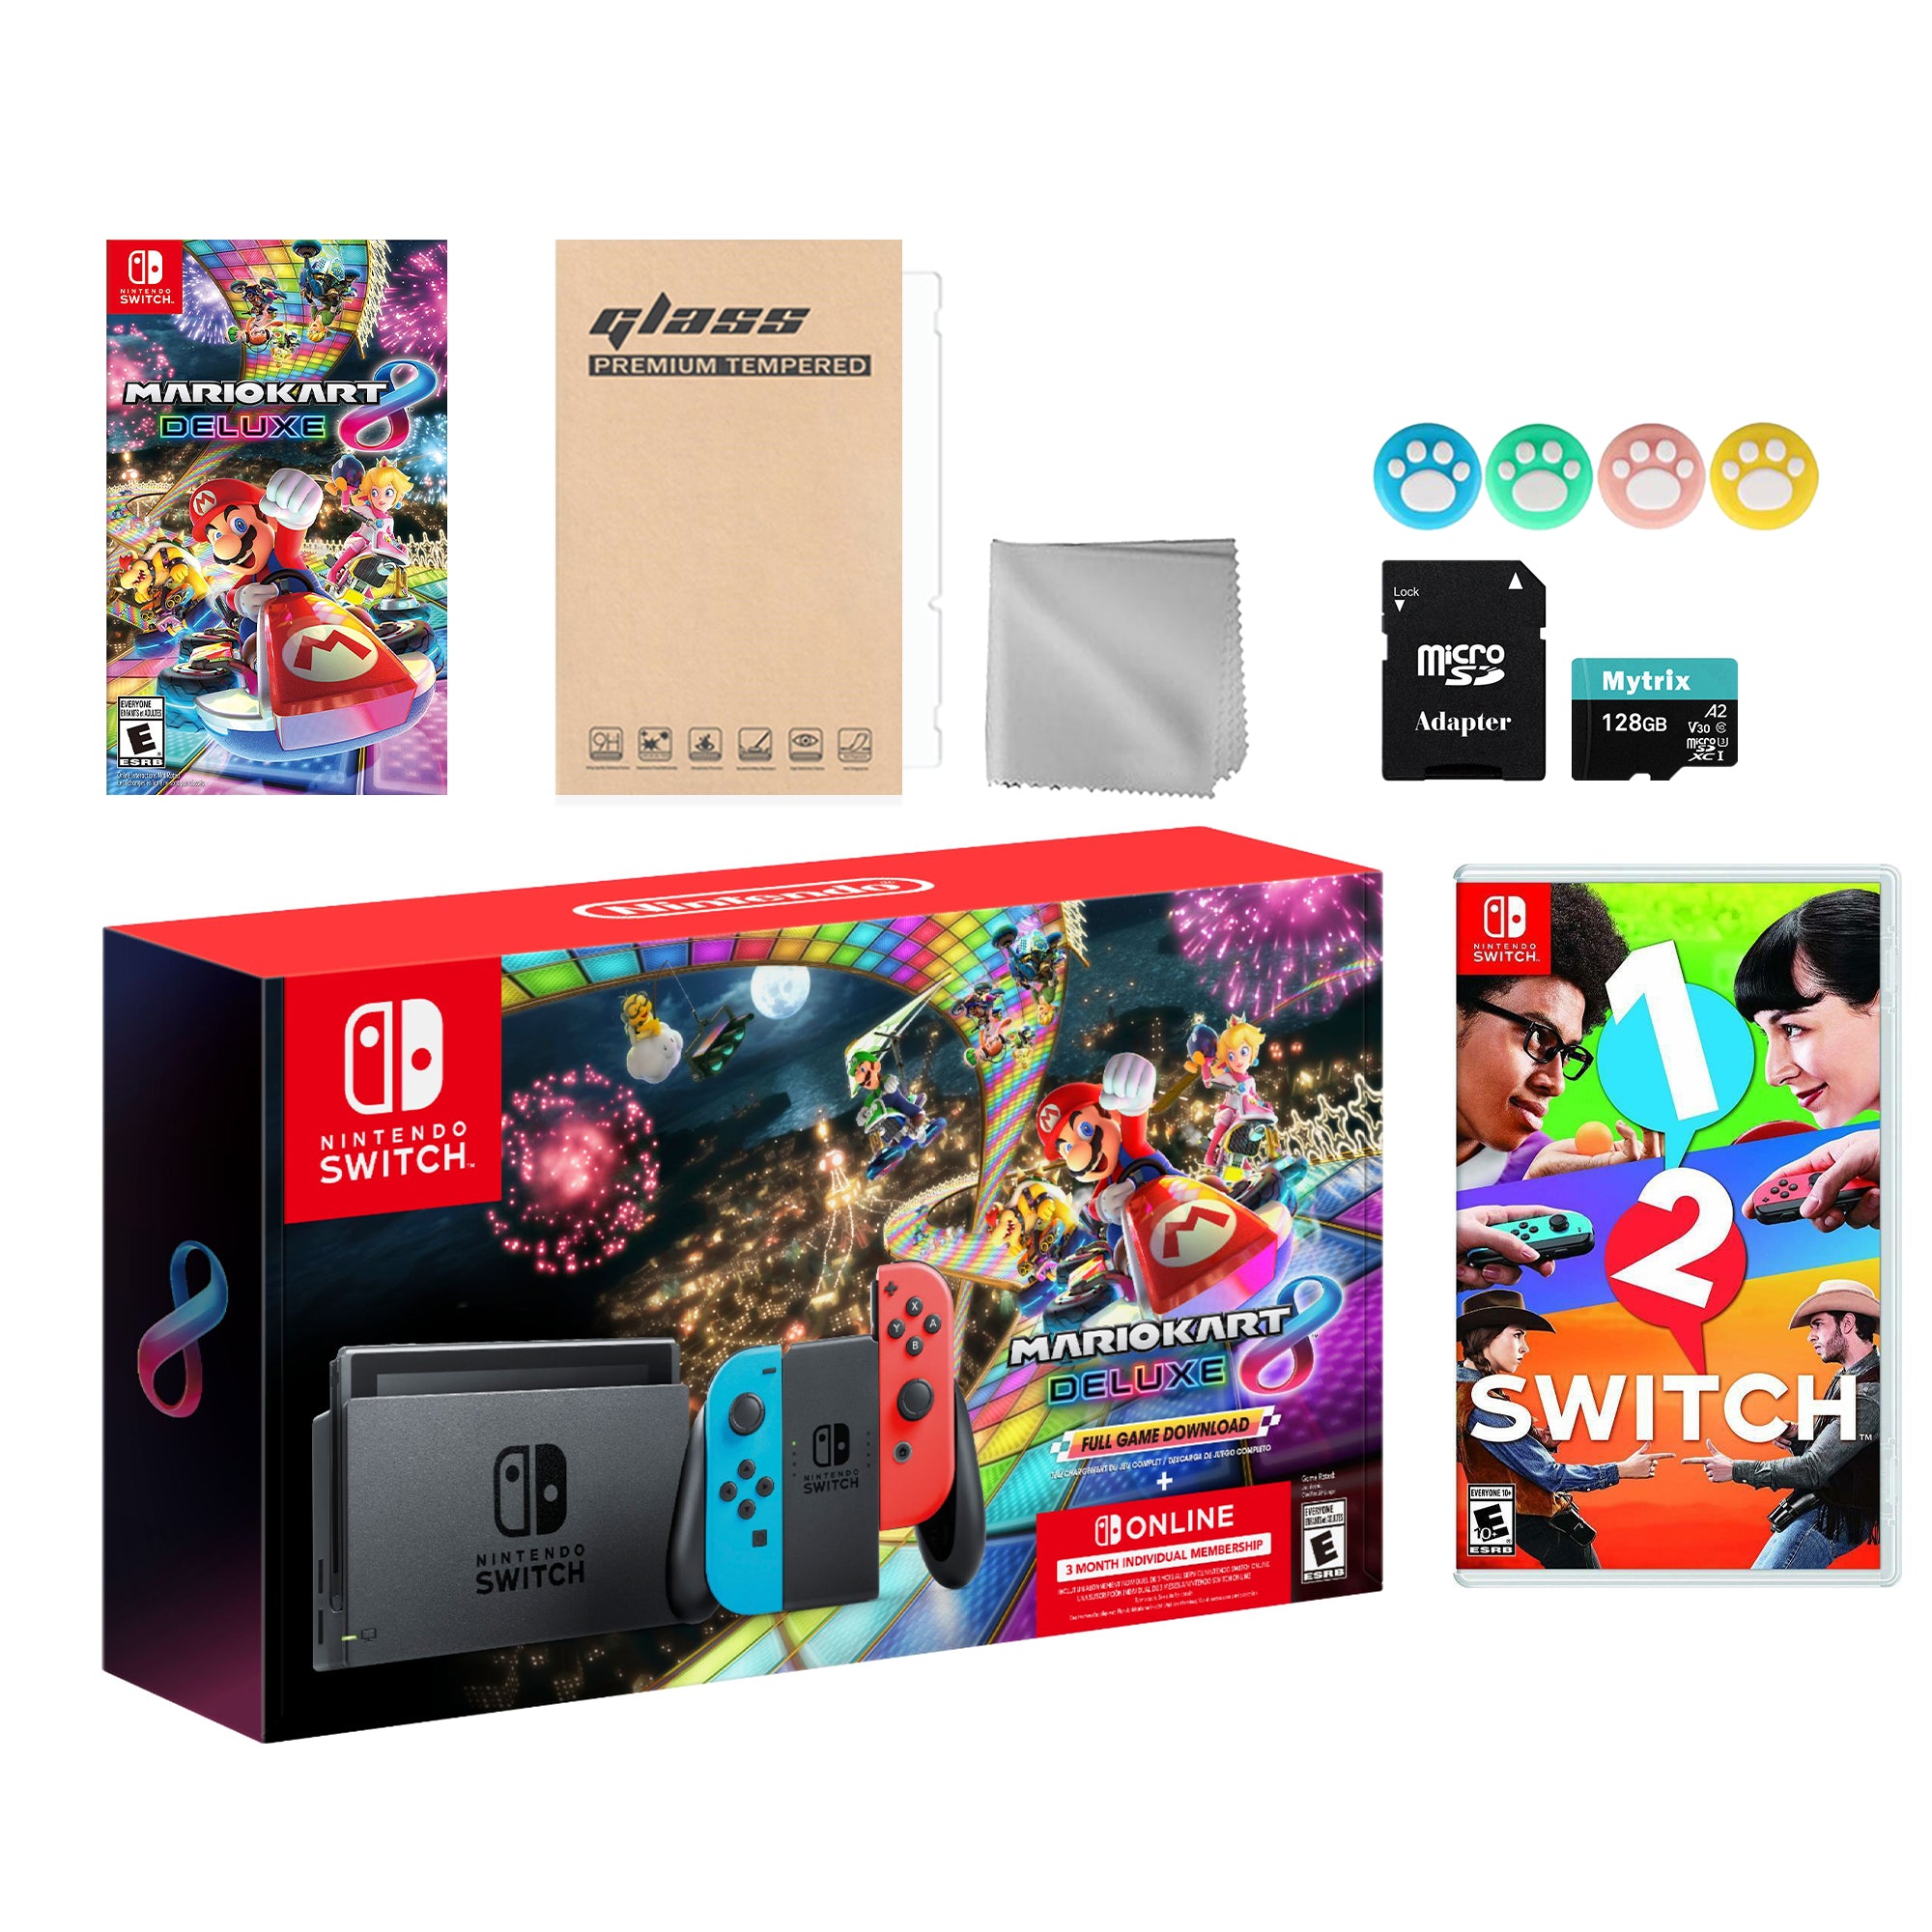 Nintendo Switch Mario Kart 8 Deluxe Bundle: Red Blue Console, Mario Kart 8 & Membership, 1-2 Switch, Mytrix 128GB MicroSD Card and Accessories